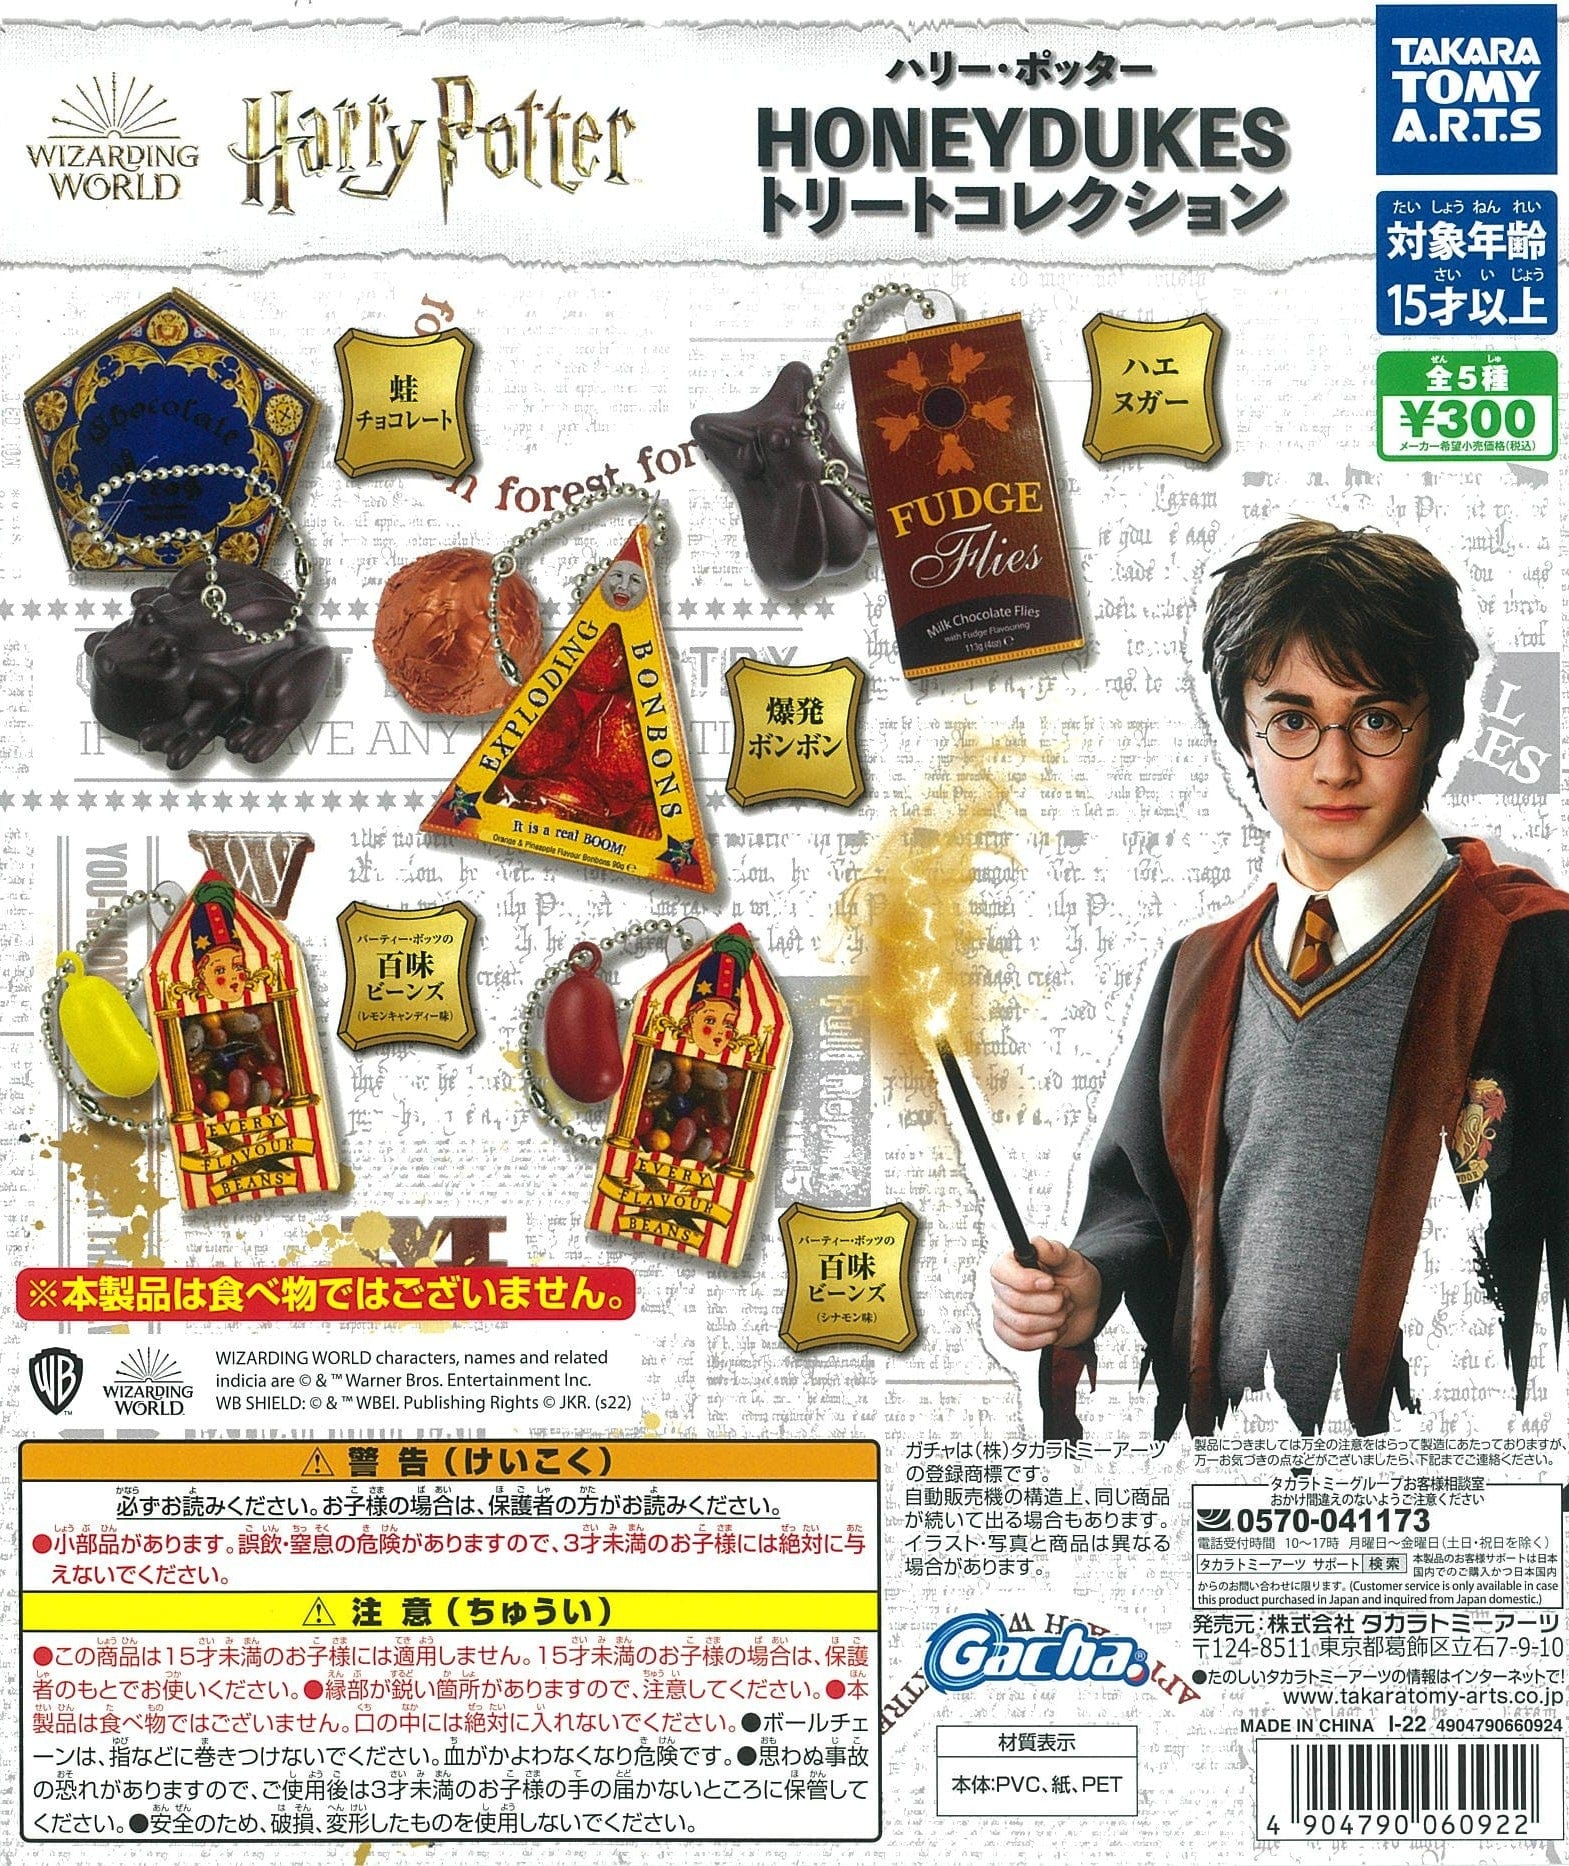 Takara Tomy A.R.T.S CP1916 Harry Potter Honeydukes Treat Collection